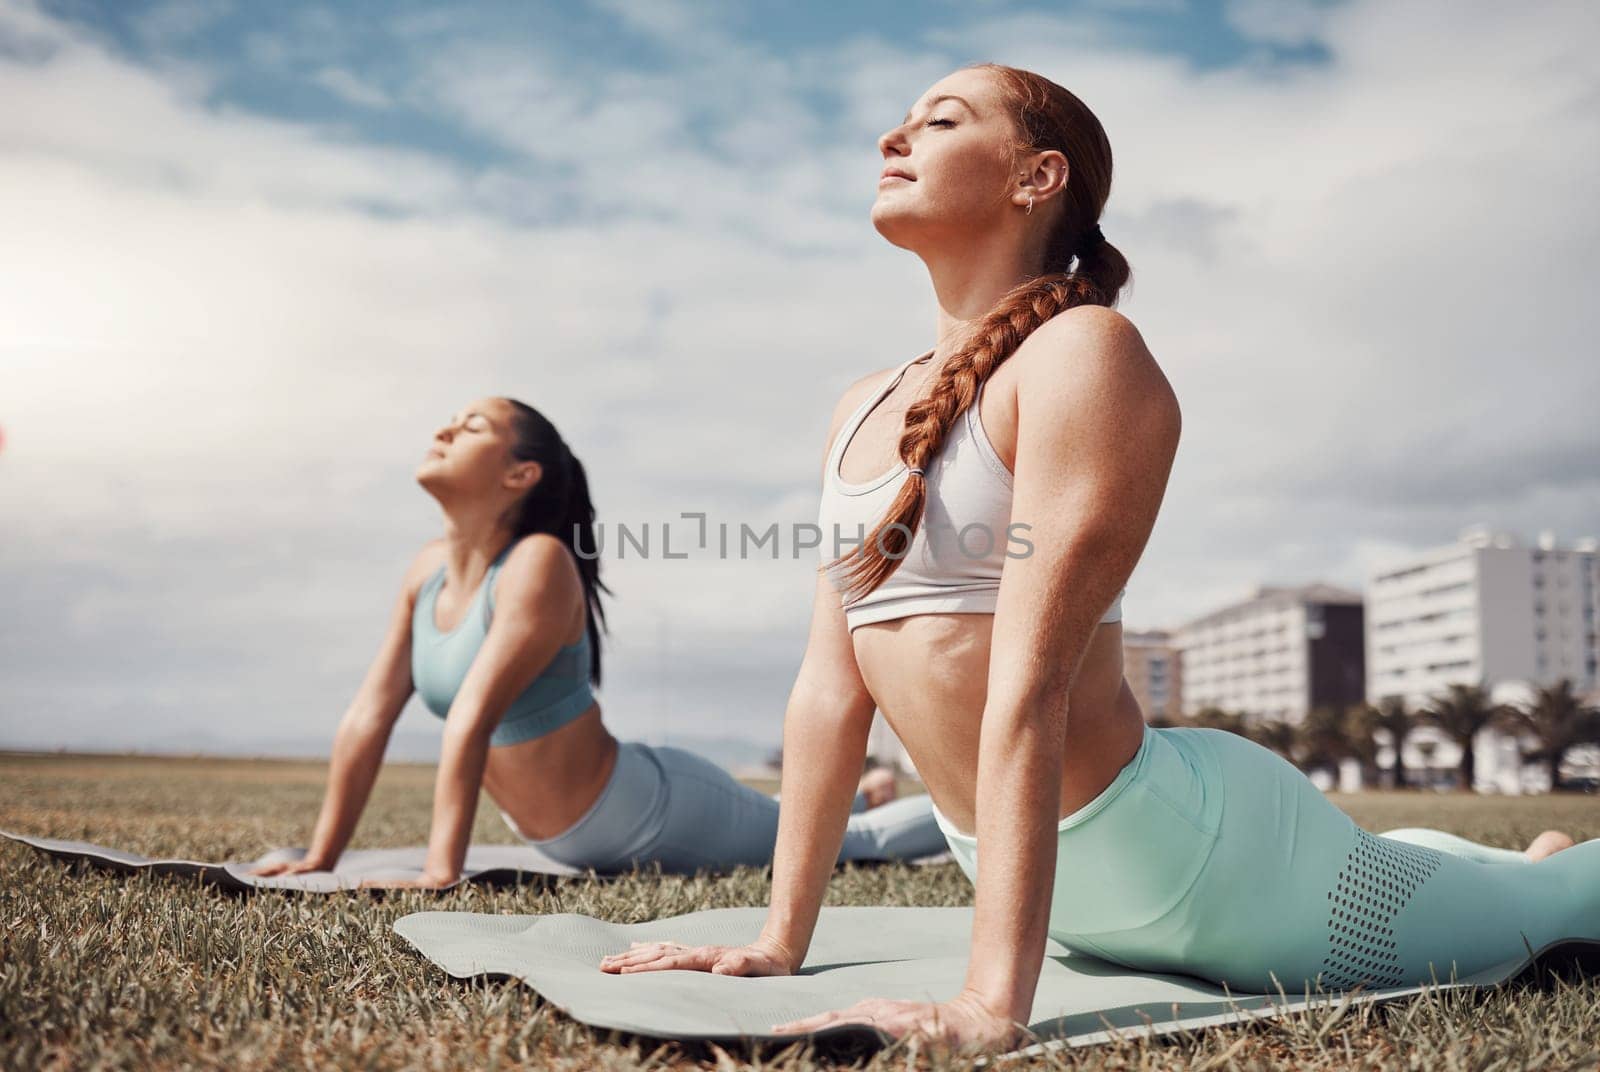 Yoga, fitness and mental health with woman friends in the park together for a wellness exercise. Exercise, zen and training with a female yogi and friend outside on a grass field for a summer workout.